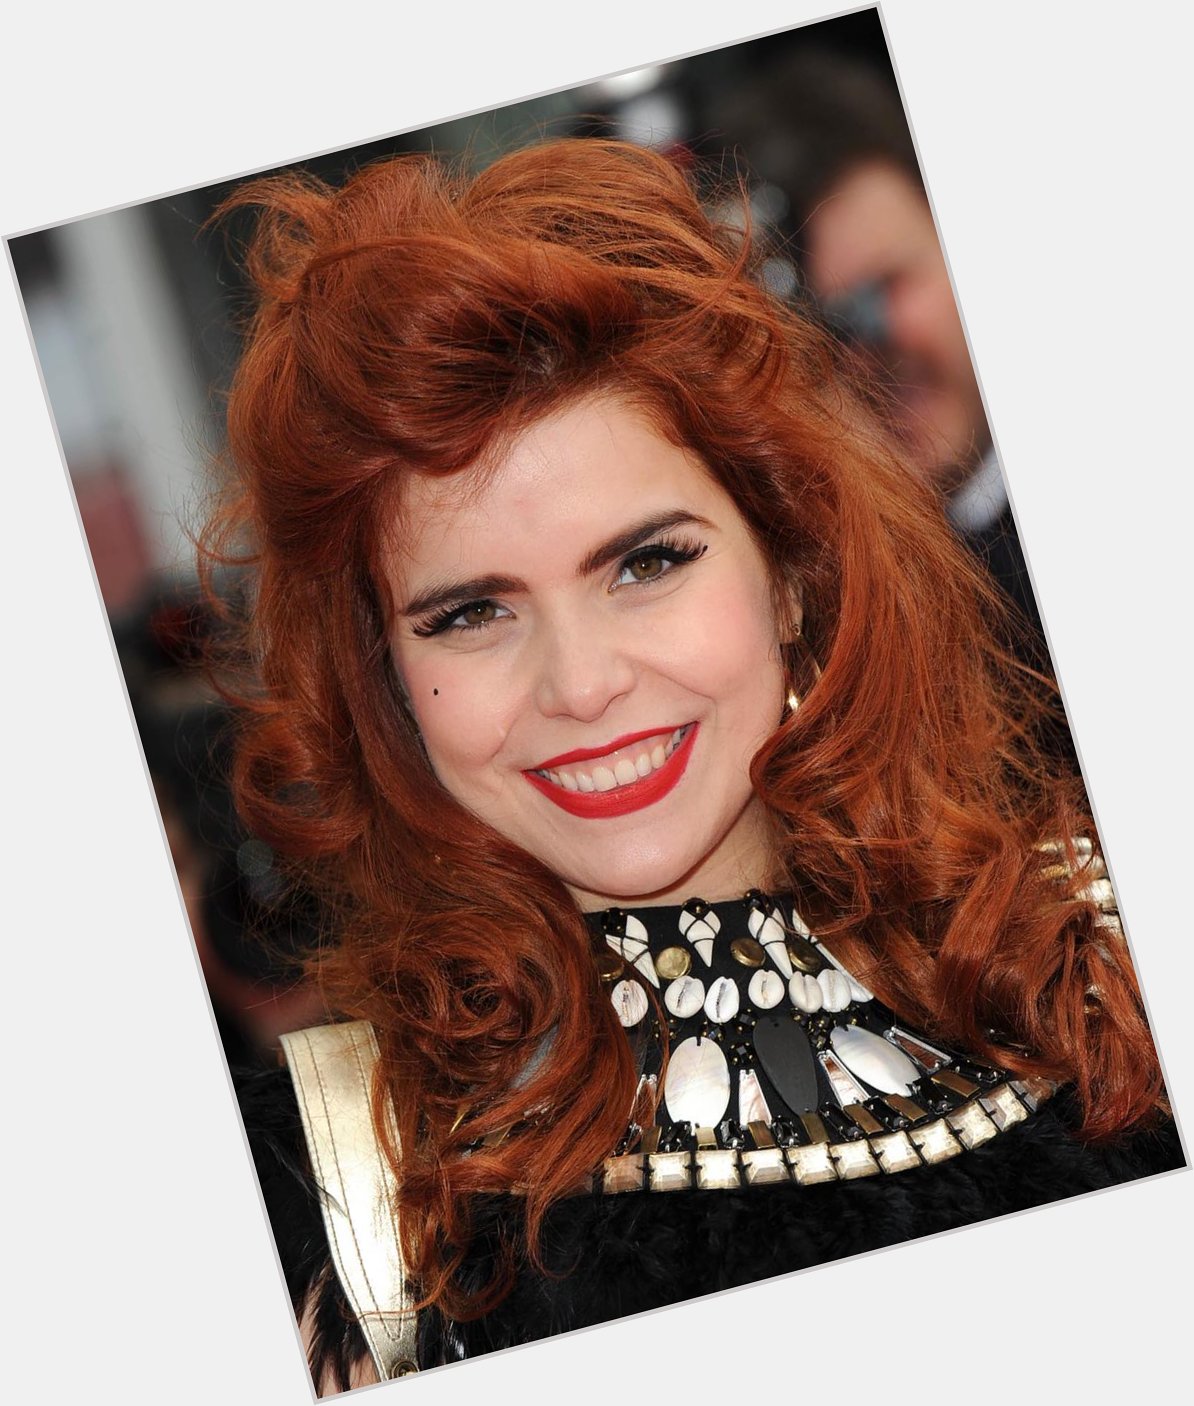 Happy birthday Paloma Faith, she\s 37 today! We\re loving her cover of \Make Your Own Kind Of Music\ at the moment. 